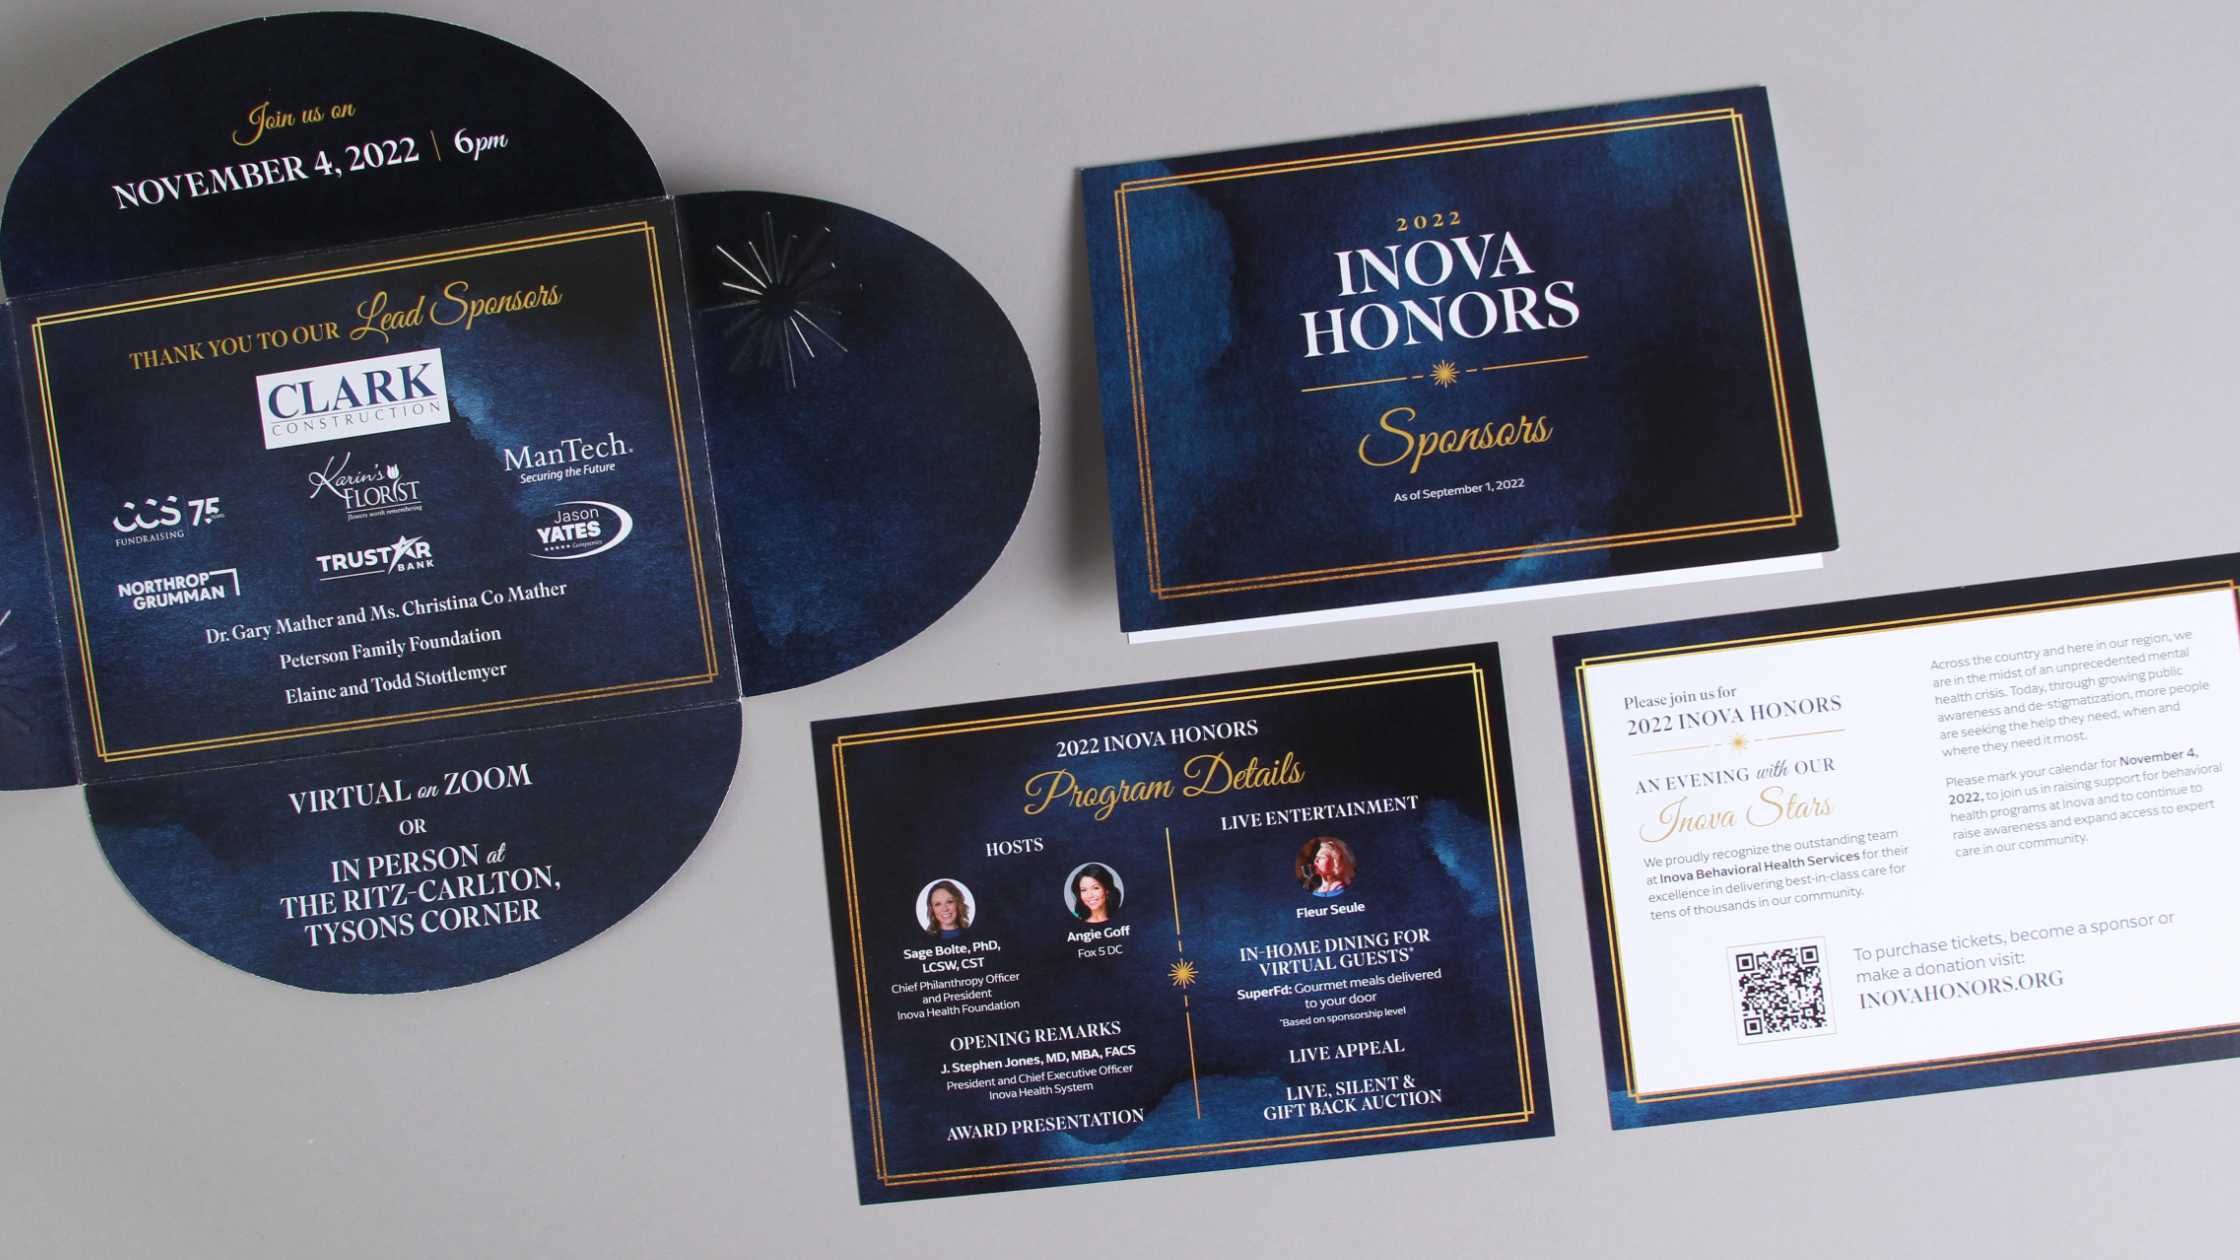 Gala event branding applied to the invitation package for the Inova Honors Gala. The package includes a petal enclosure, major sponsors, and preview of the program, and RSVP details on dark blue watercolor textured paper with gold accents.